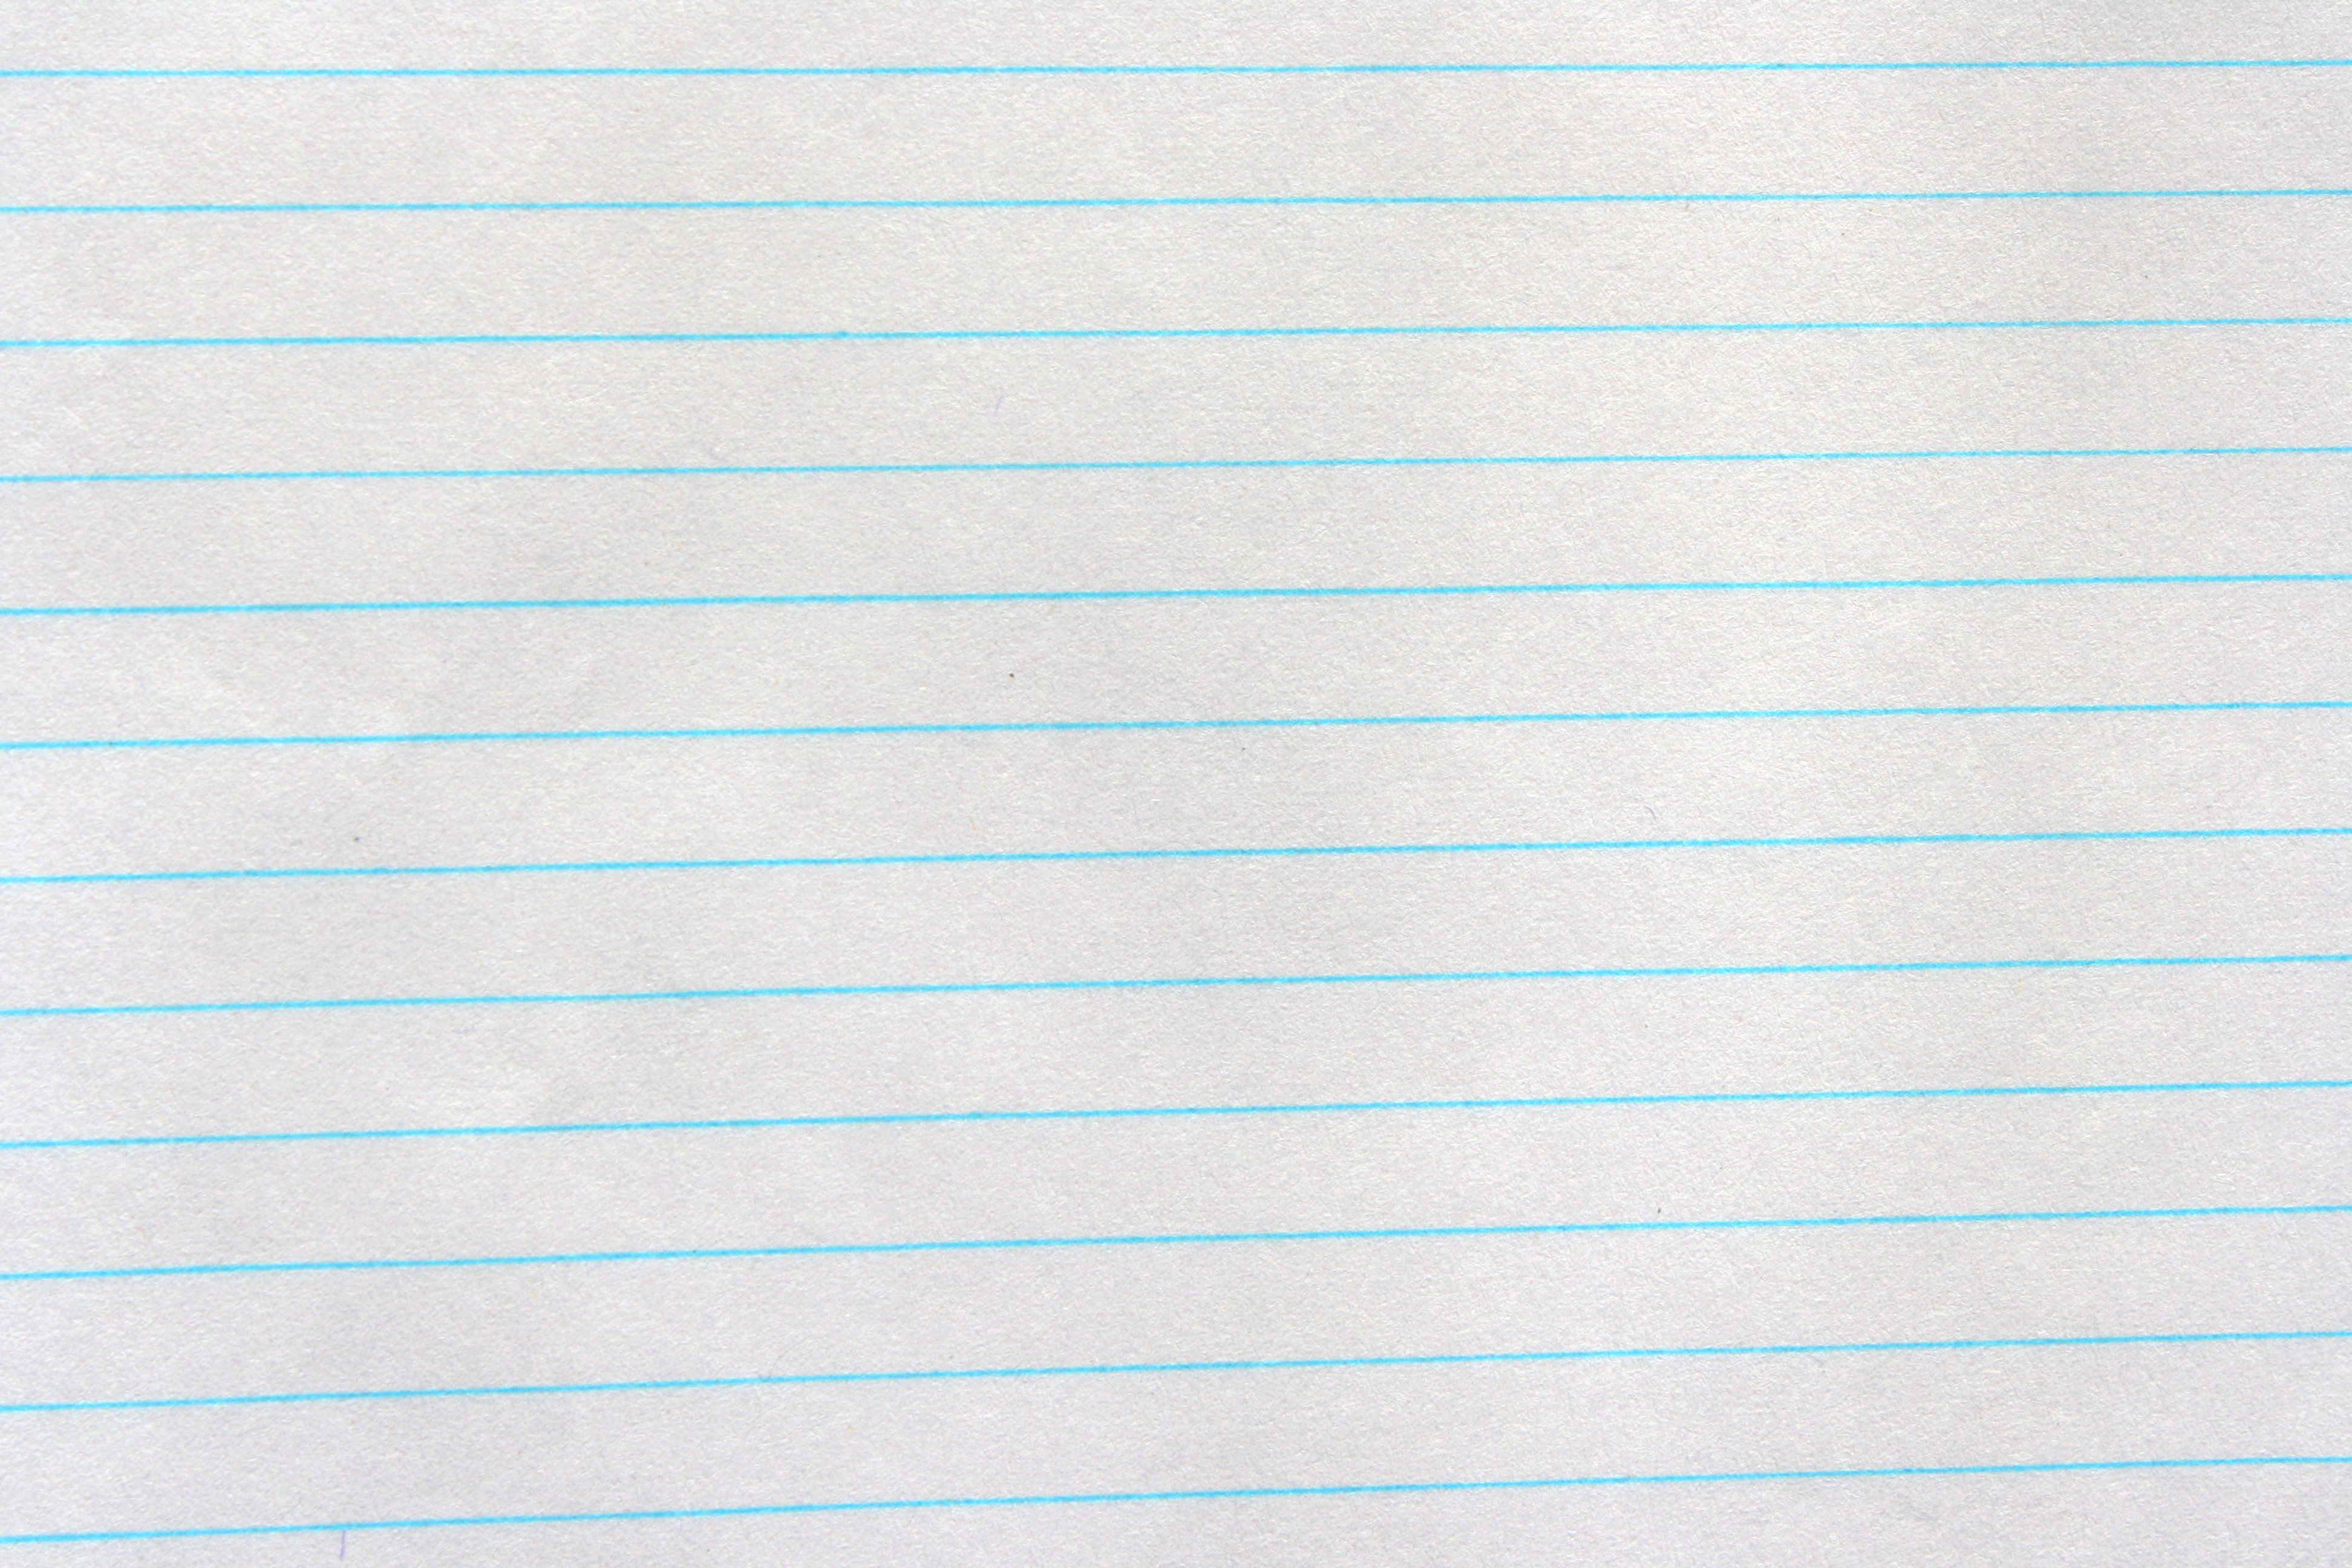 Notebook Paper Texture High Resolution Photo Dimensions